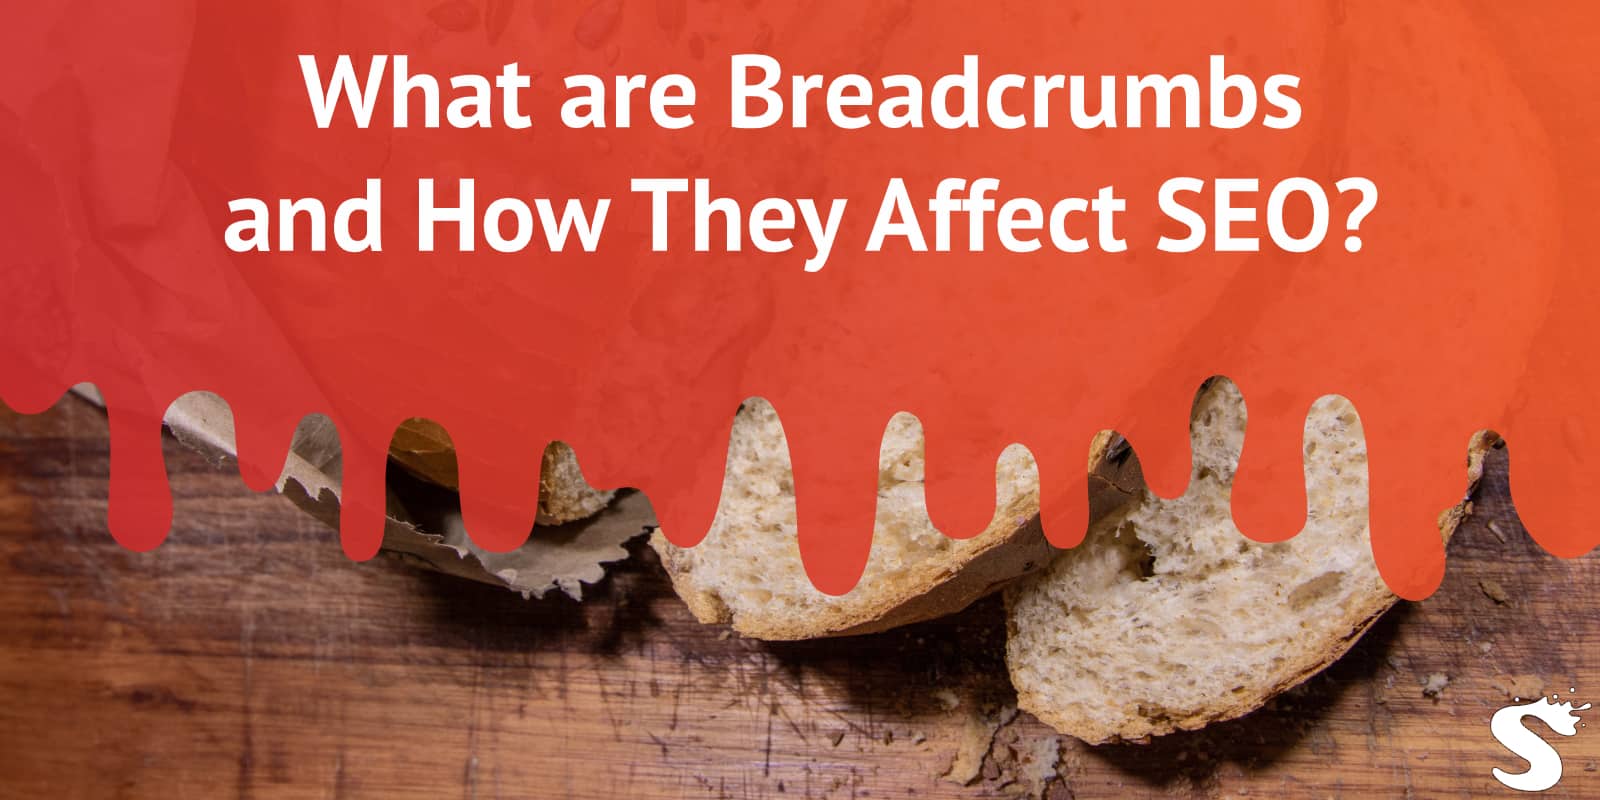 Breadcrumbs and how they affect SEO